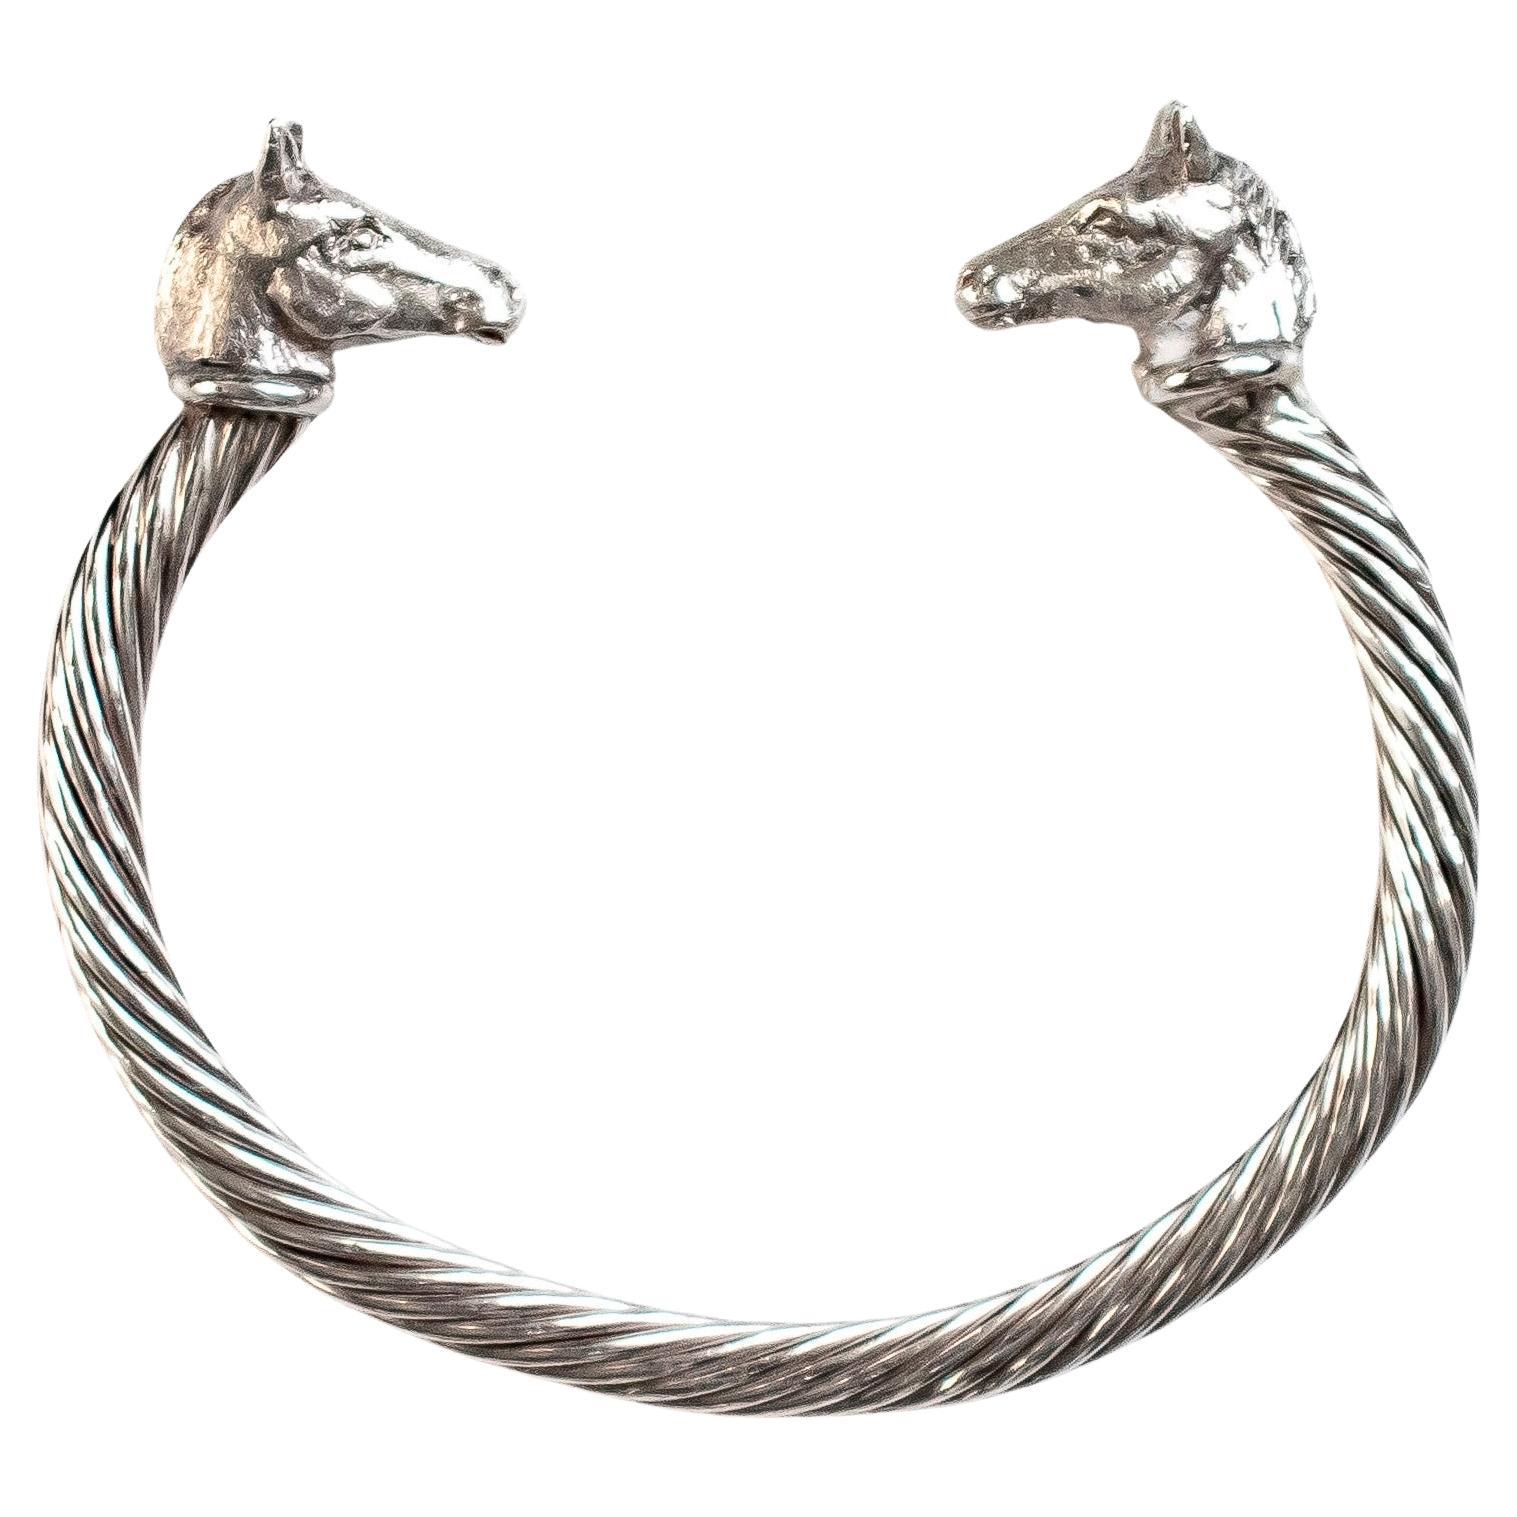 Paul Eaton Sculpted Pony Heads on Sterling Silver Twisted Bangle Bracelet For Sale